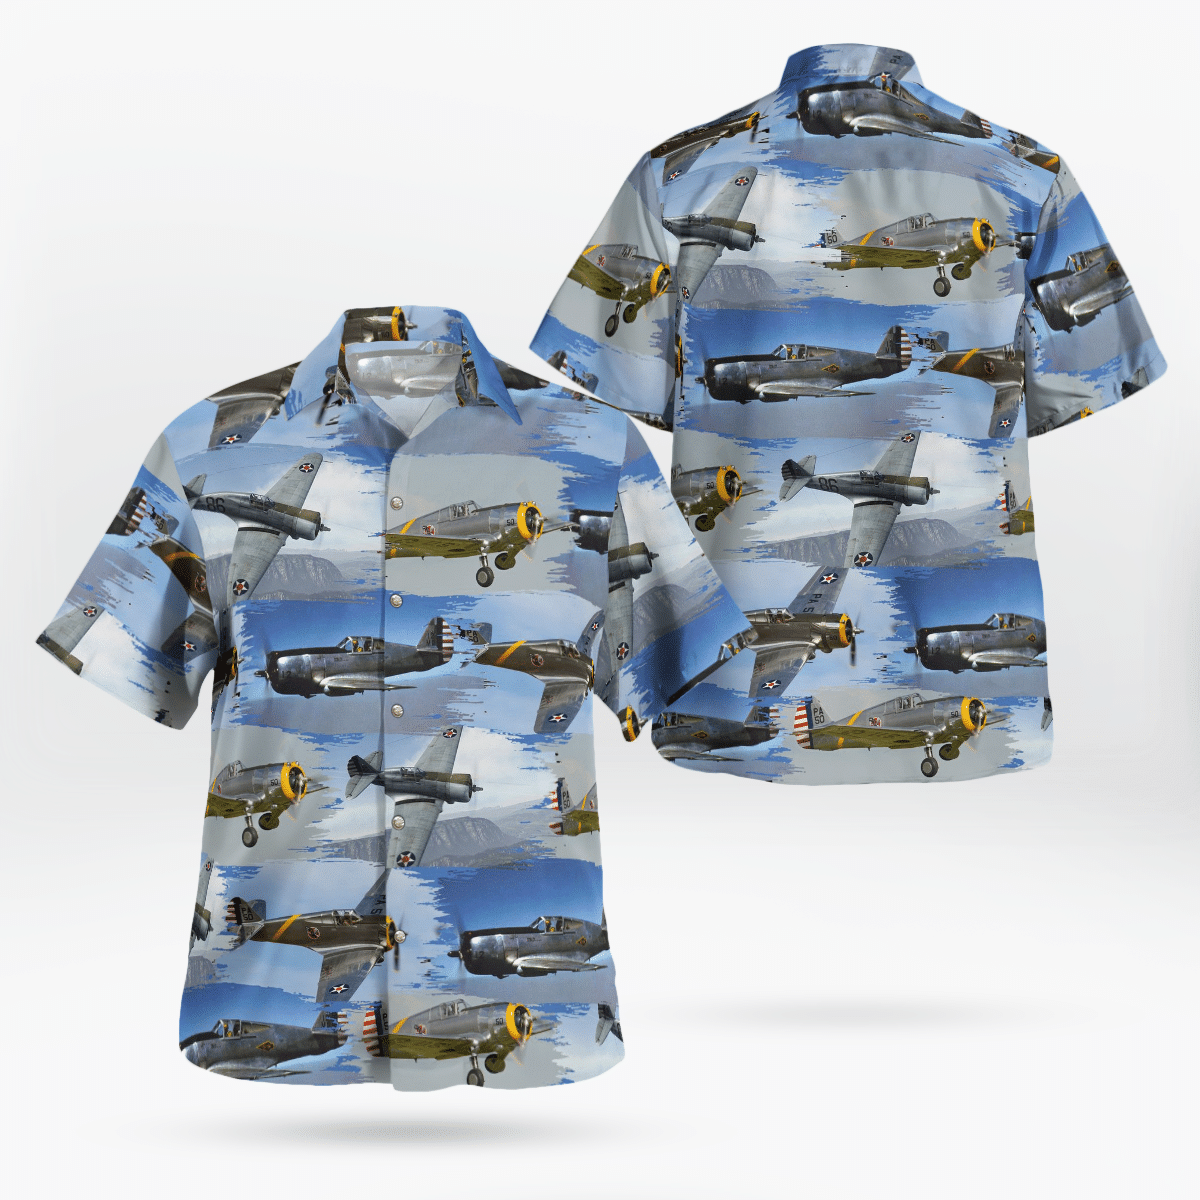 Shop now to find the perfect Hawaii Shirt for your hobby 93